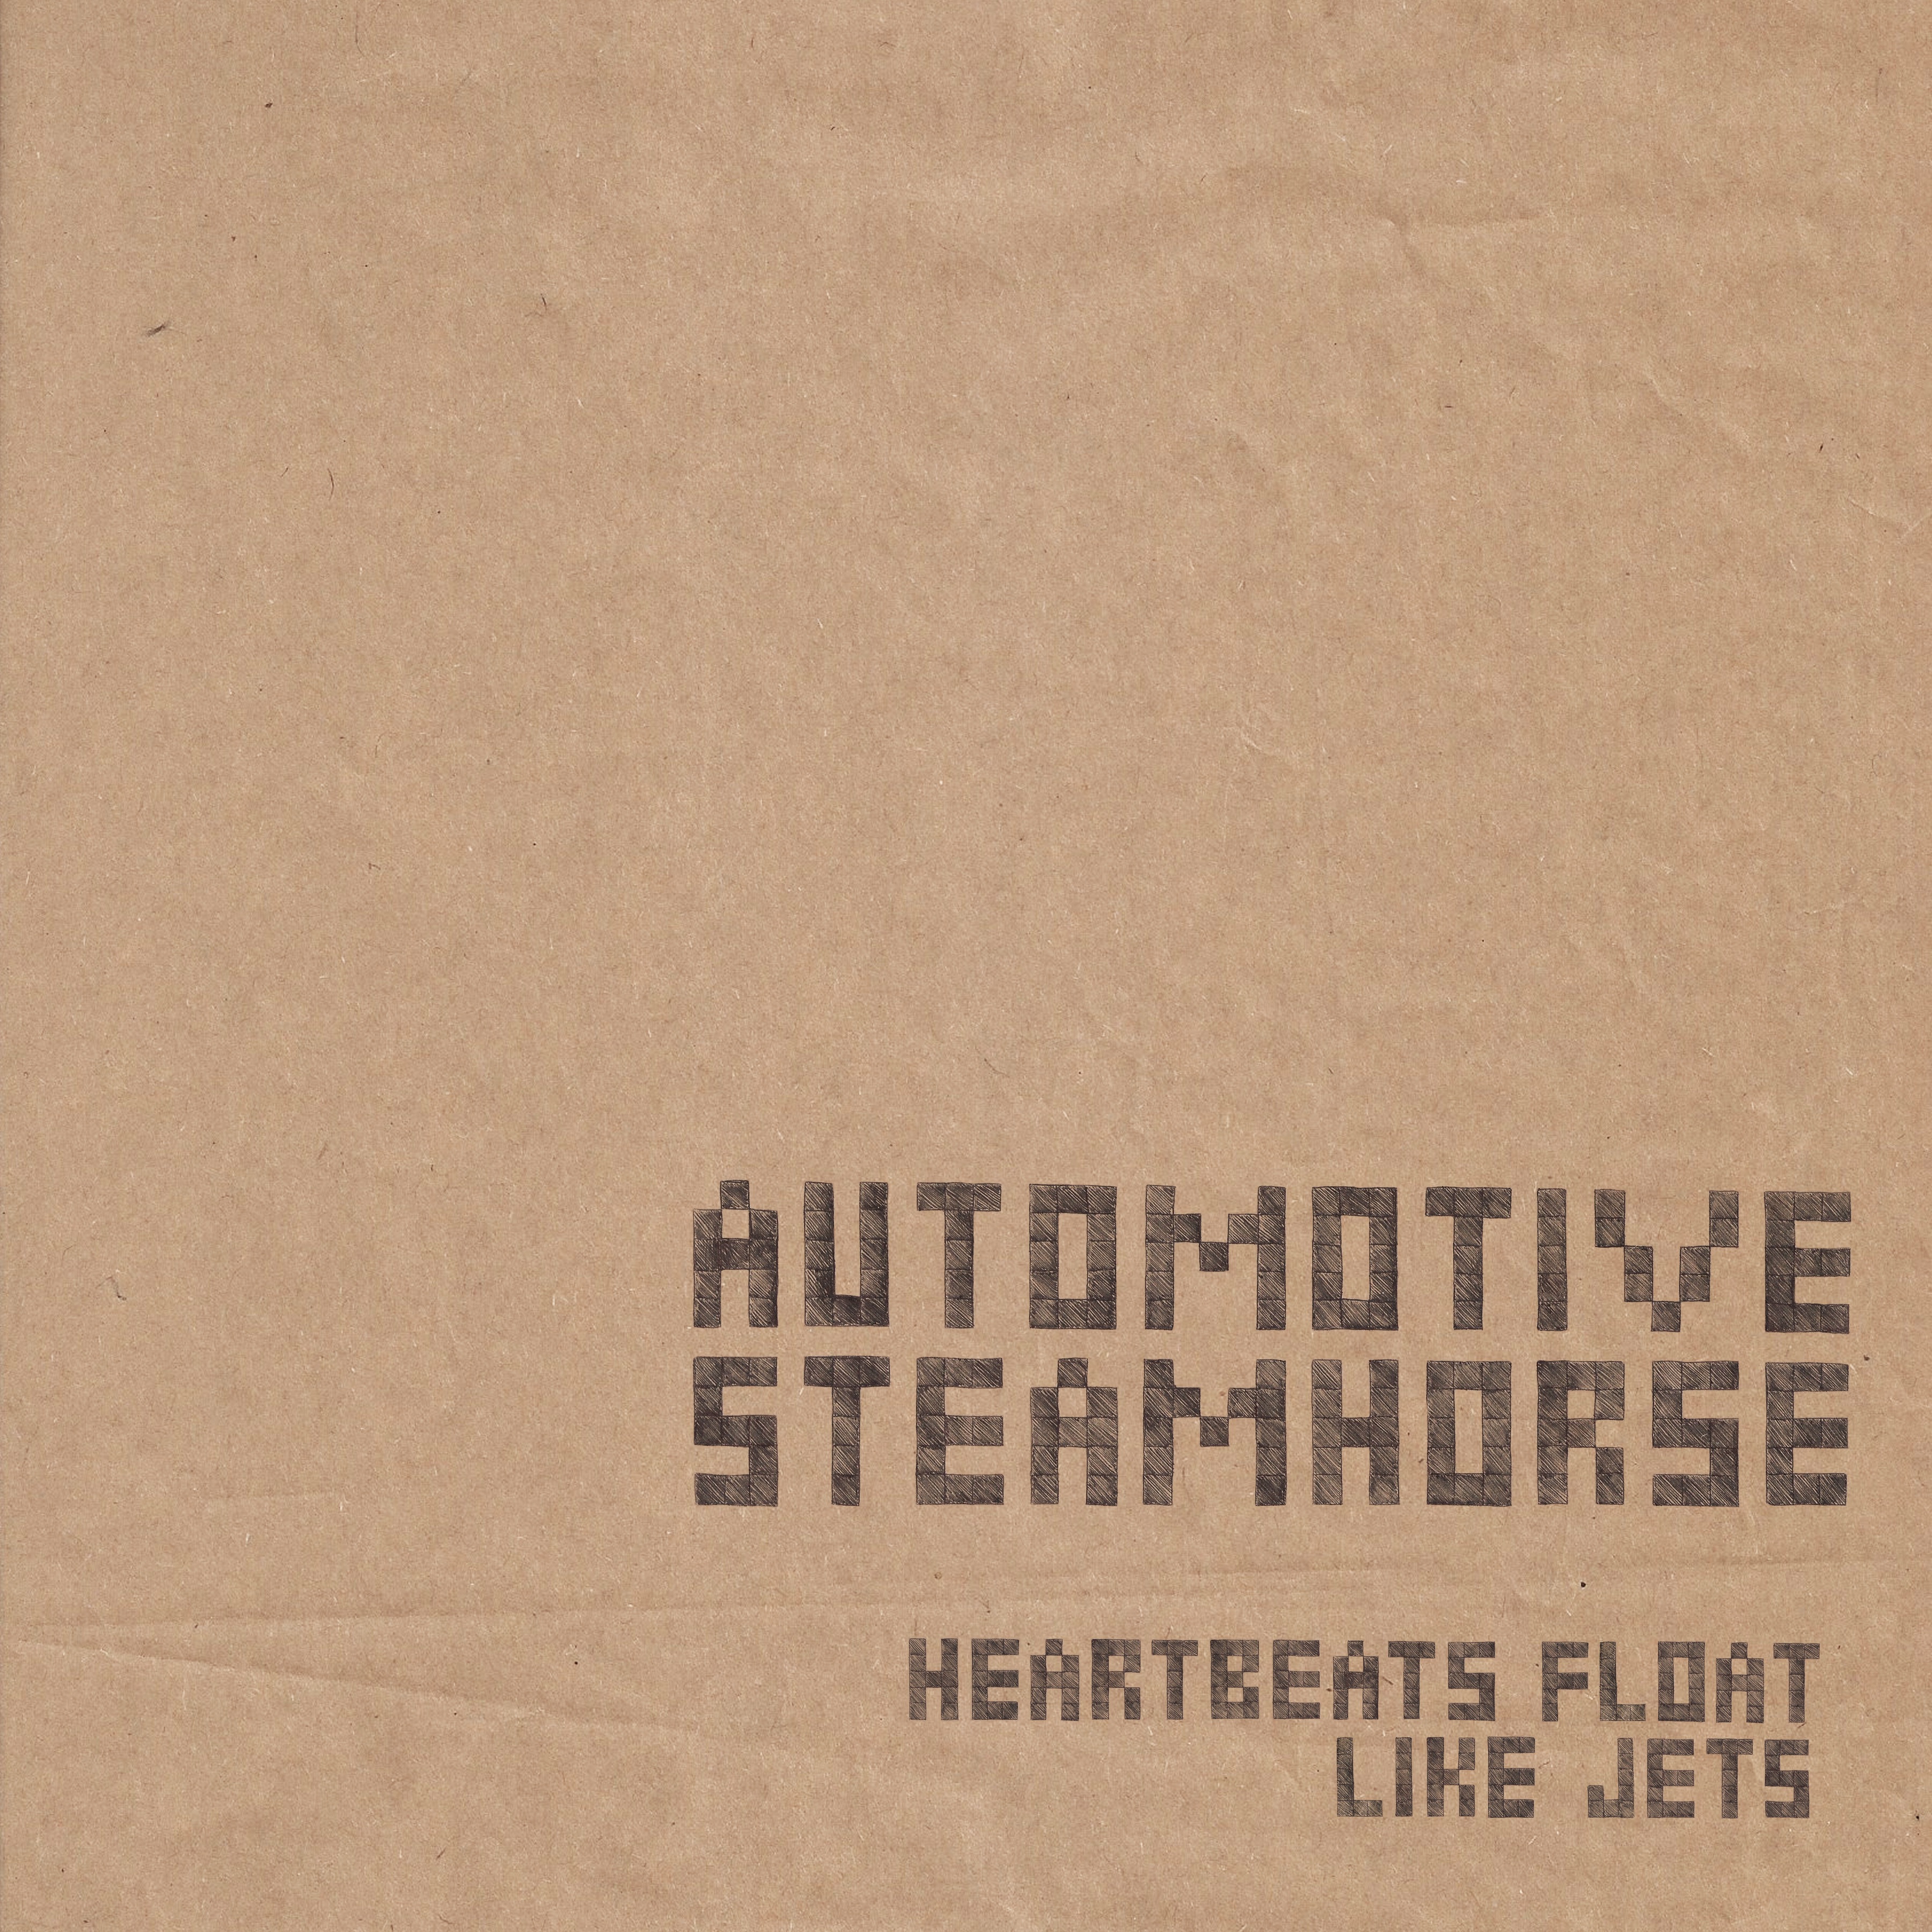 Automotive Steamhorse – “You’d Be Surprised”